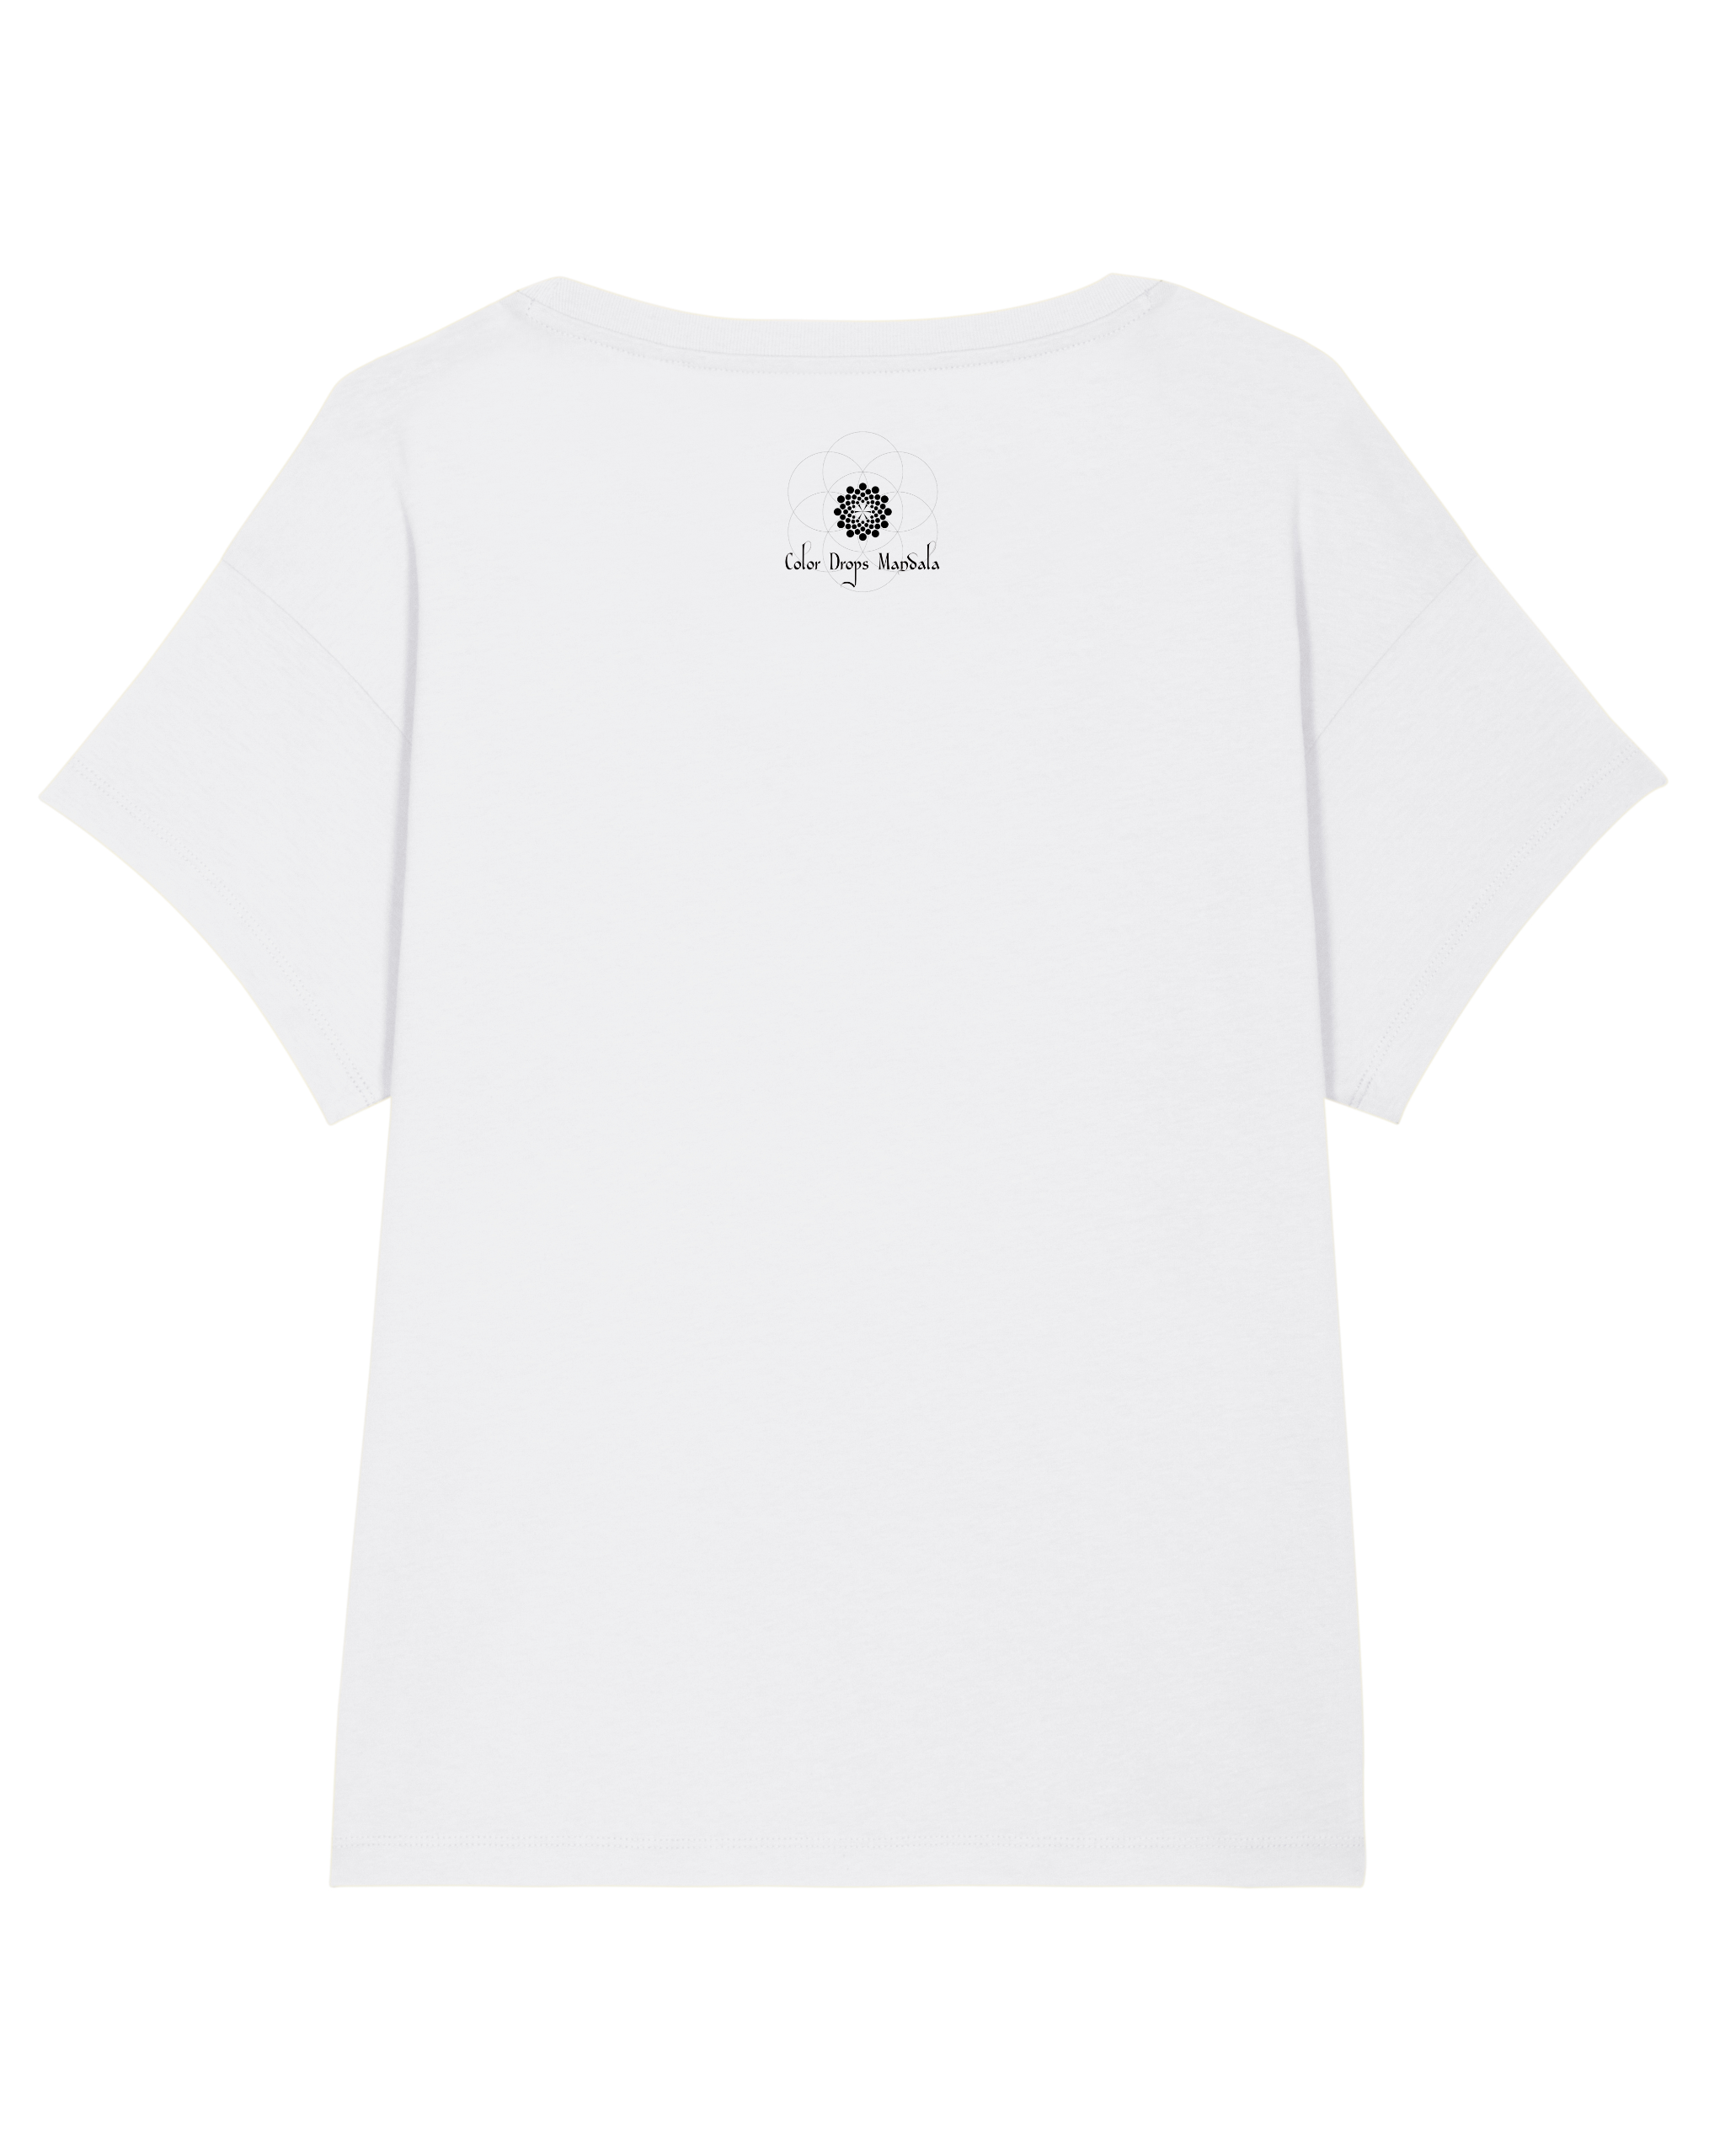 Relaxed fit t-shirt, white / black - Vitality